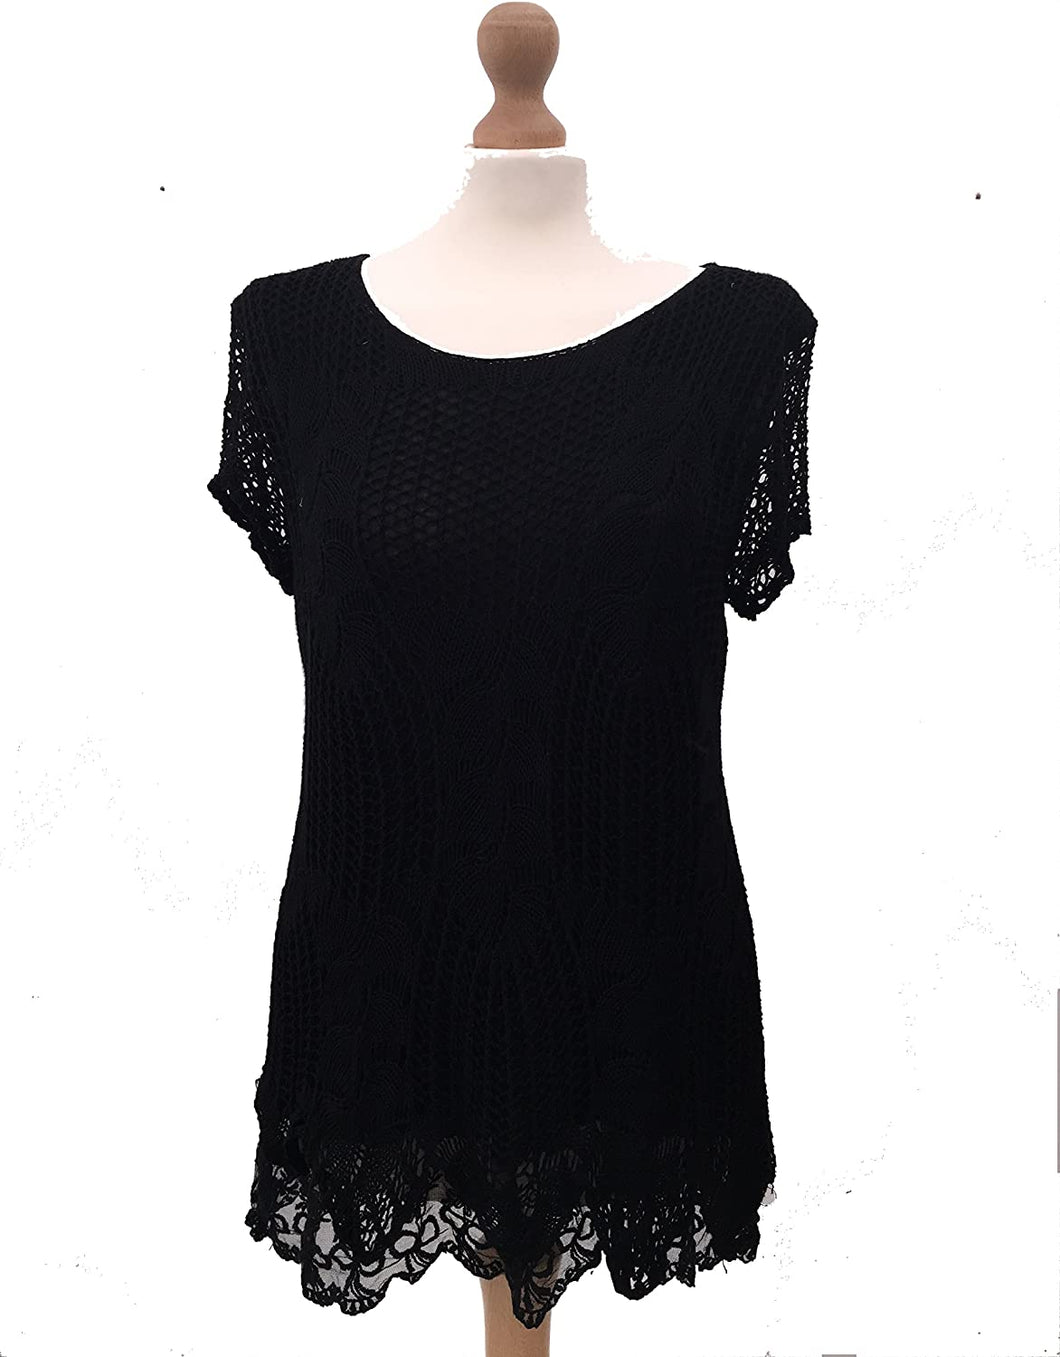 Pamper Yourself Now ltd Ladies Black Crochet lace Short Sleeve top.Made in Italy (AA18)